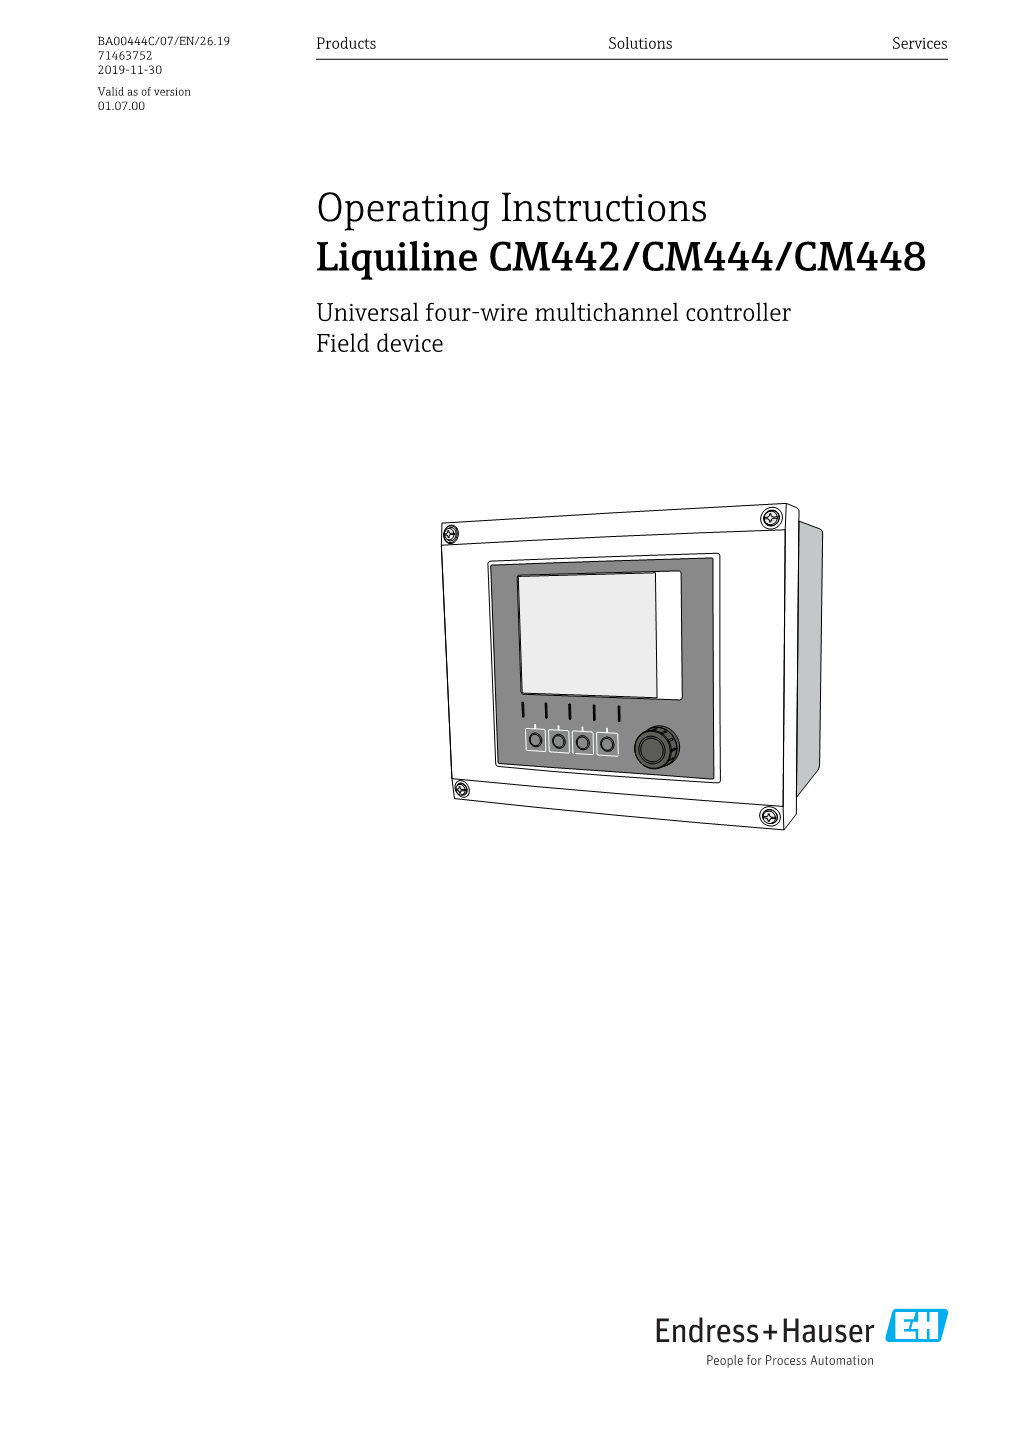 Operating Instructions Liquiline CM442/CM444/CM448 Universal Four-Wire Multichannel Controller Field Device